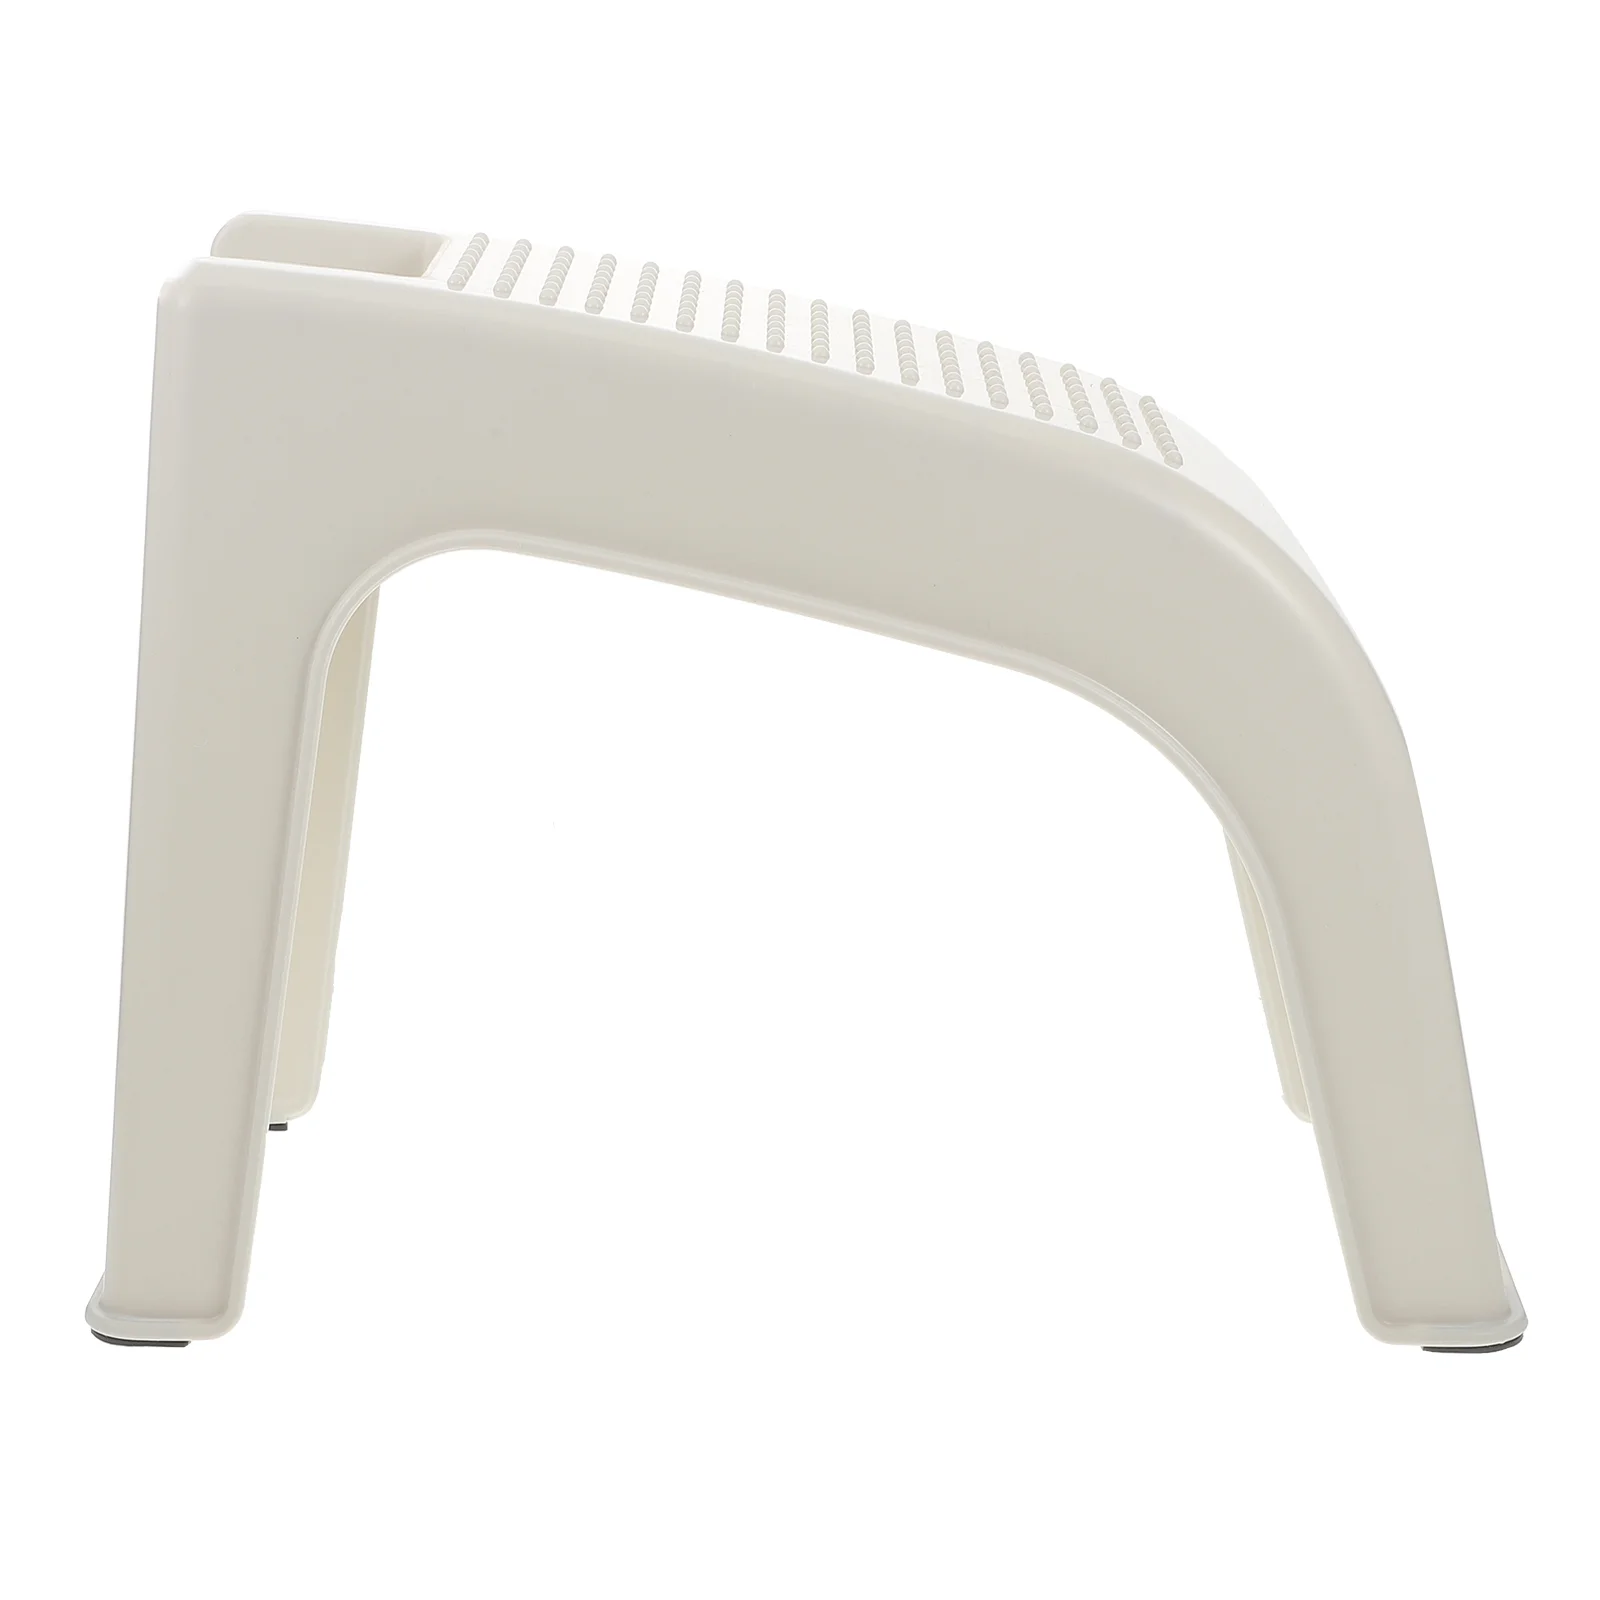 

Pedicure Stool Support House Plastic Footstool Small Bathroom Out Door Chair Footboard Tools Pedal